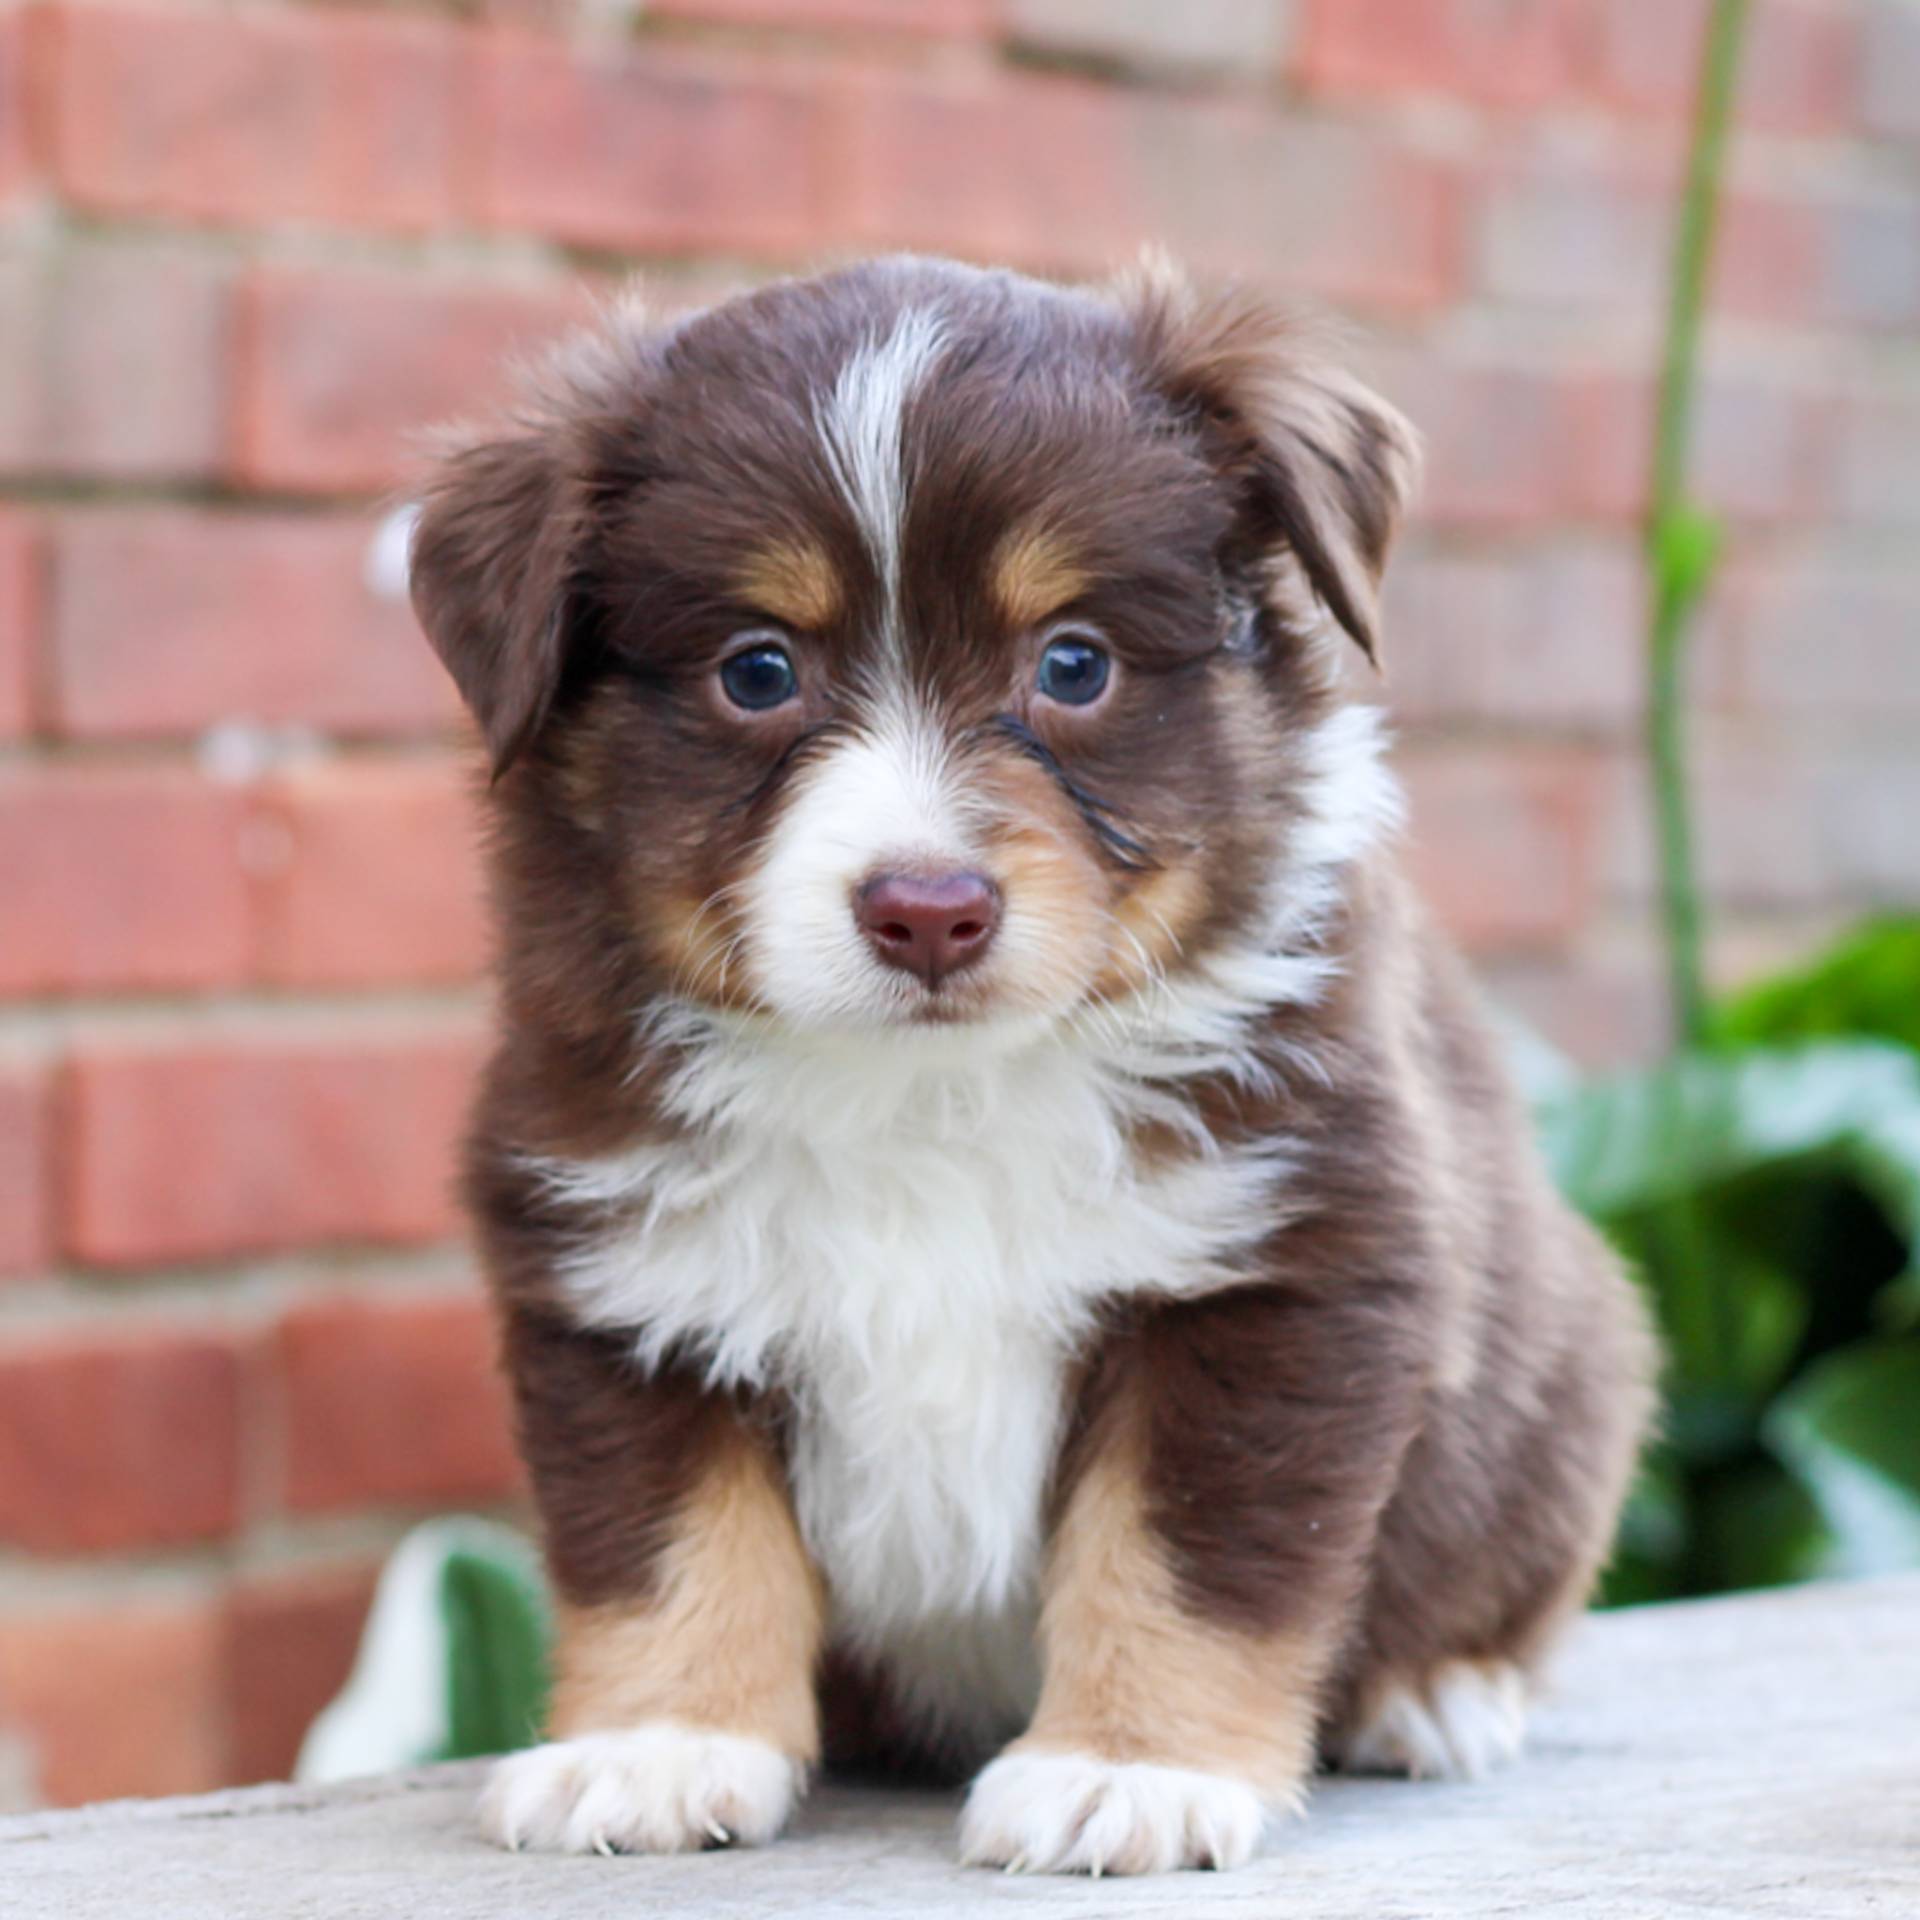 Robust Læsbarhed Mikroprocessor Australian Shepherd - Mini Puppies For Sale • Adopt Your Puppy Today •  Infinity Pups